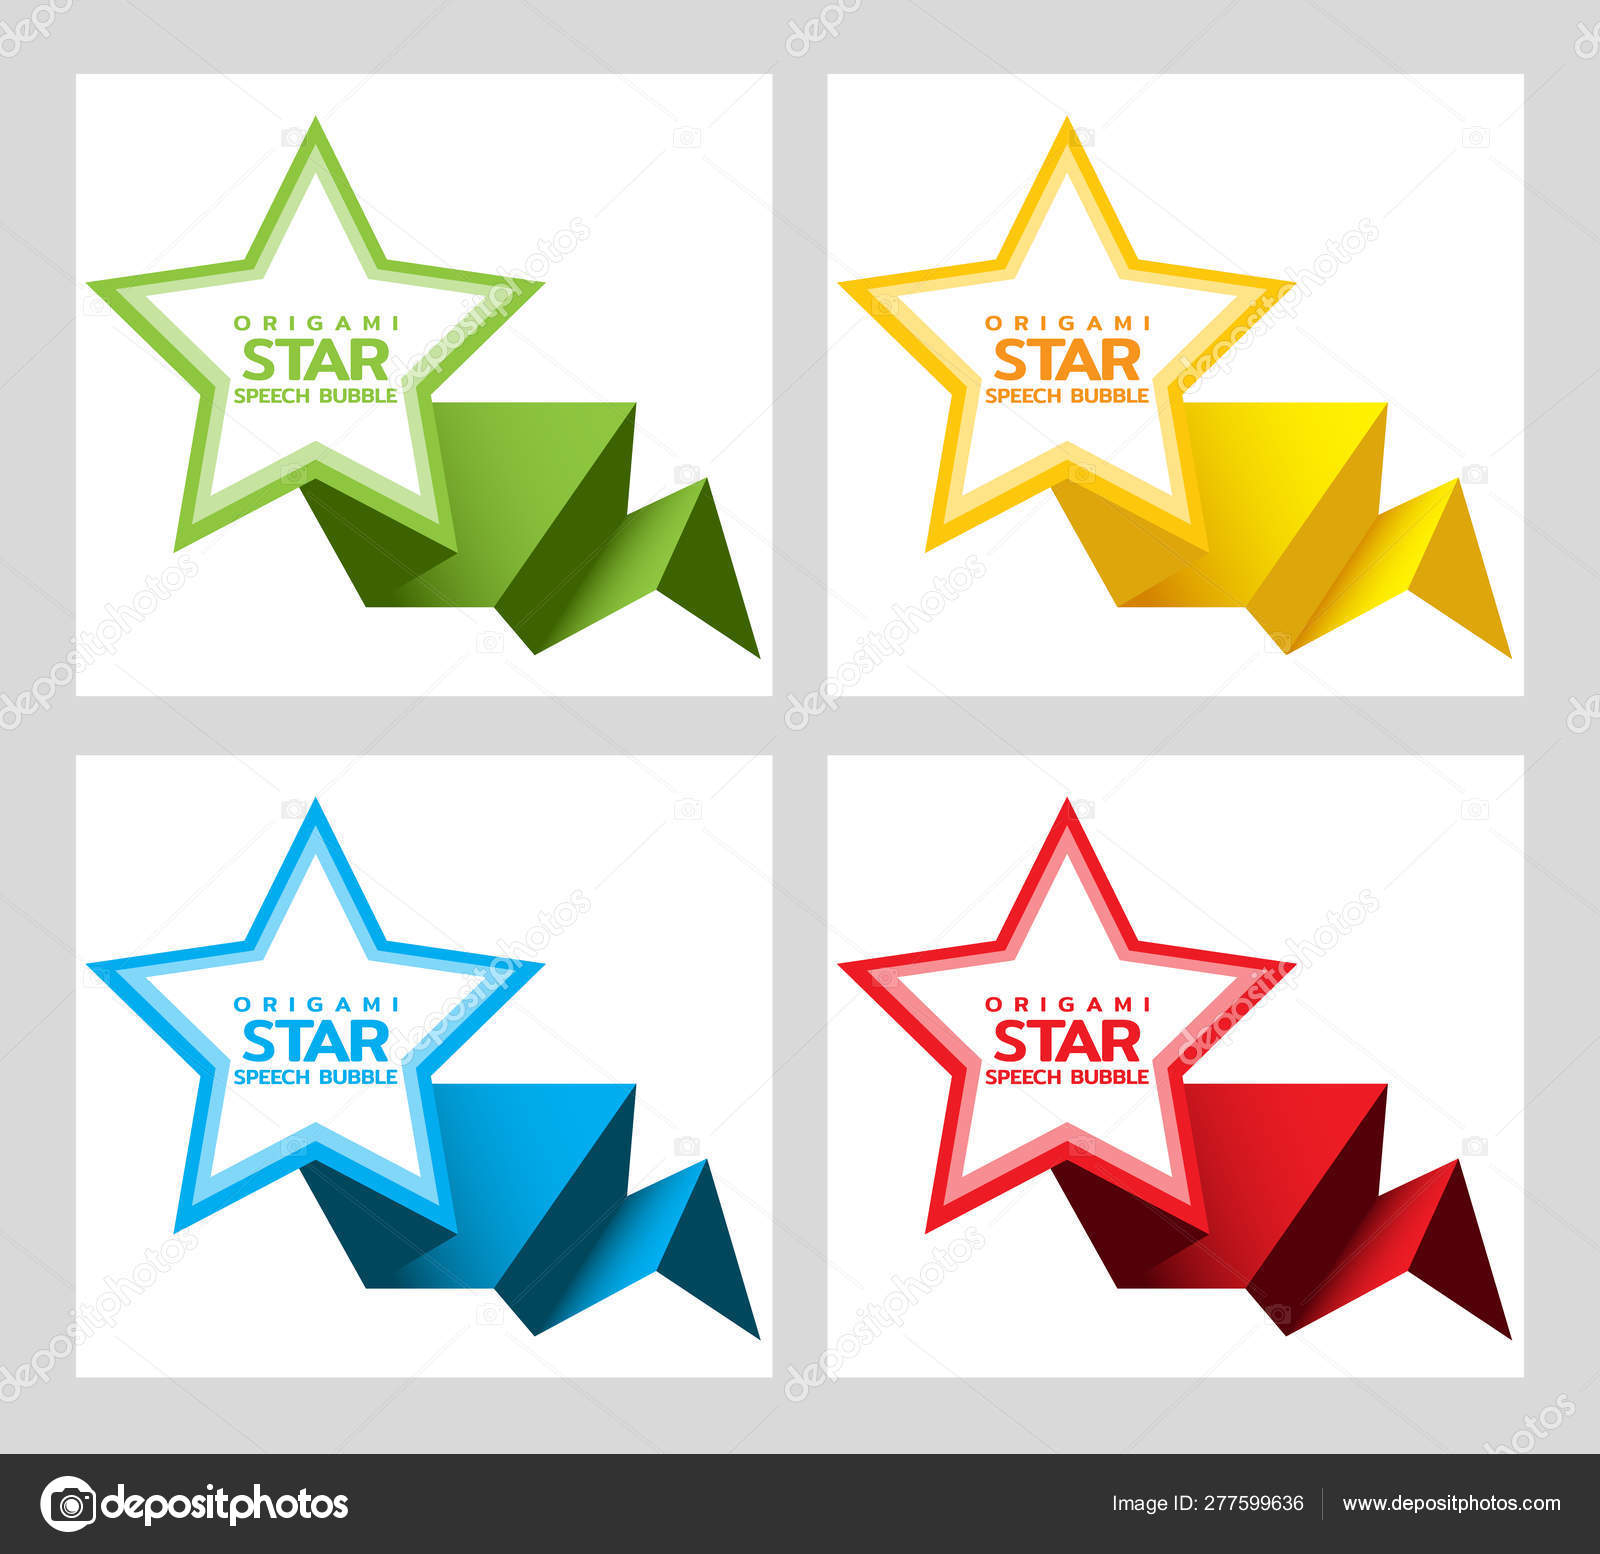 Origami Star How To Set Of Origami Star Speech Bubble Isolated On White For Design Of